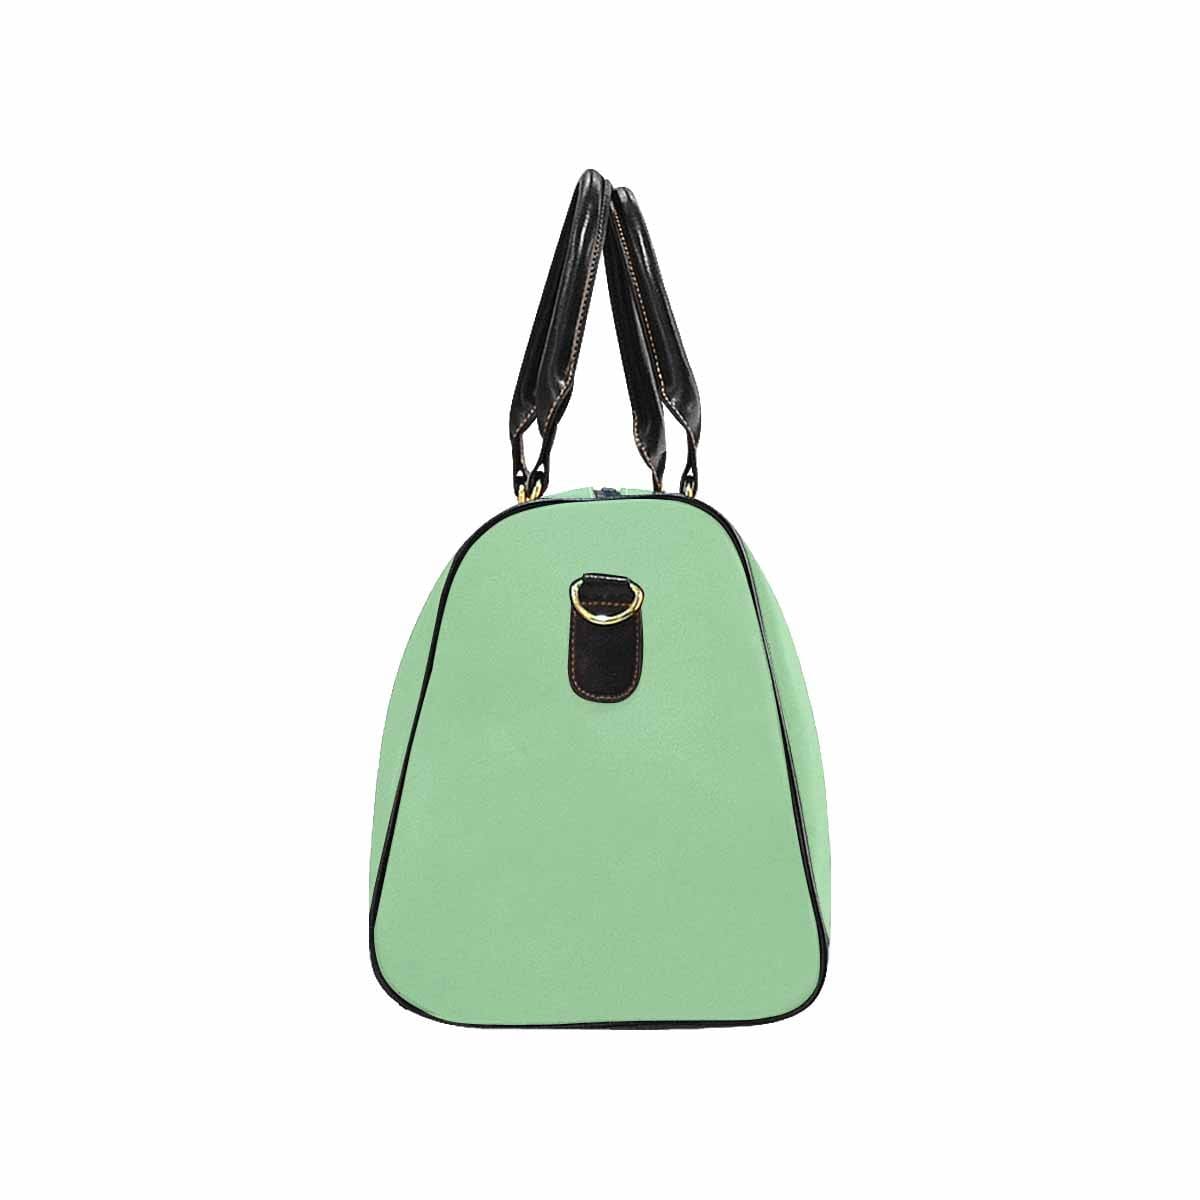 Travel Bag Leather Carry On Large Luggage Bag Celadon Green - Bags | Travel Bags